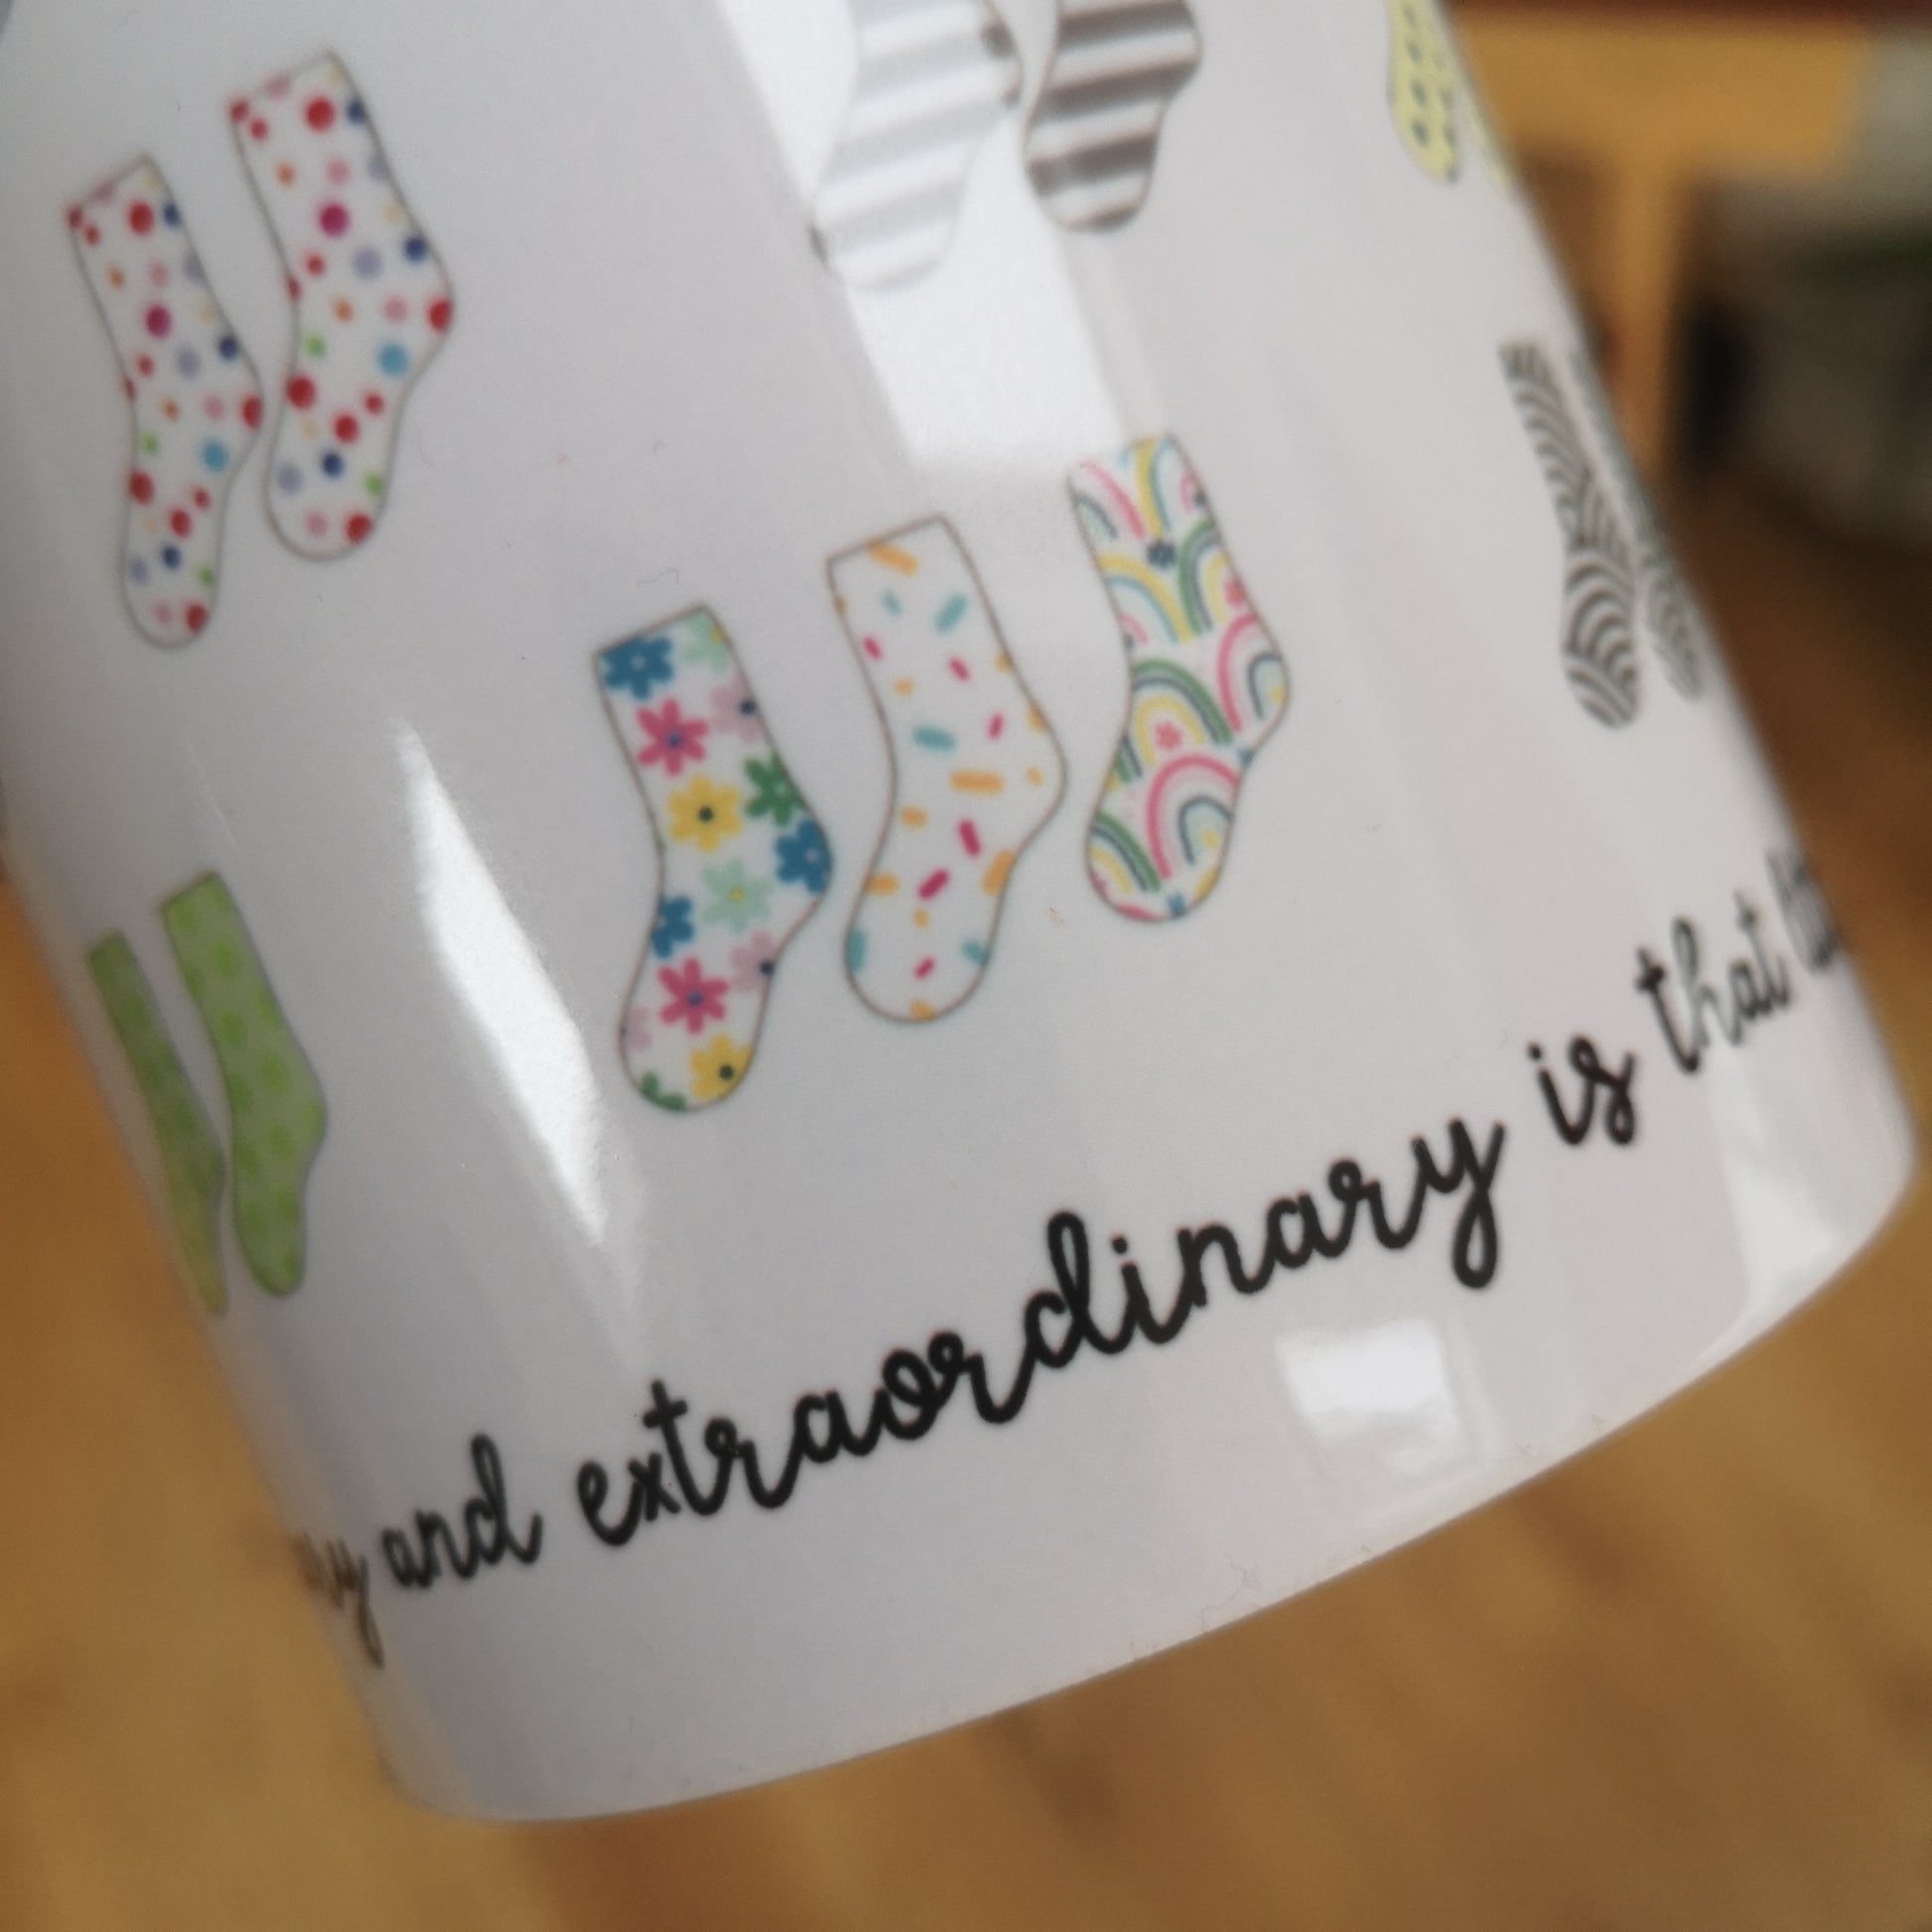 A close up of the mug that celebrates Down Syndrome and how it is the result of having 47 chromosomes instead of 46.  Each colourful pair of socks represents the 44 chromosomes we all have, but pair 21 has 3 socks instead of 2.